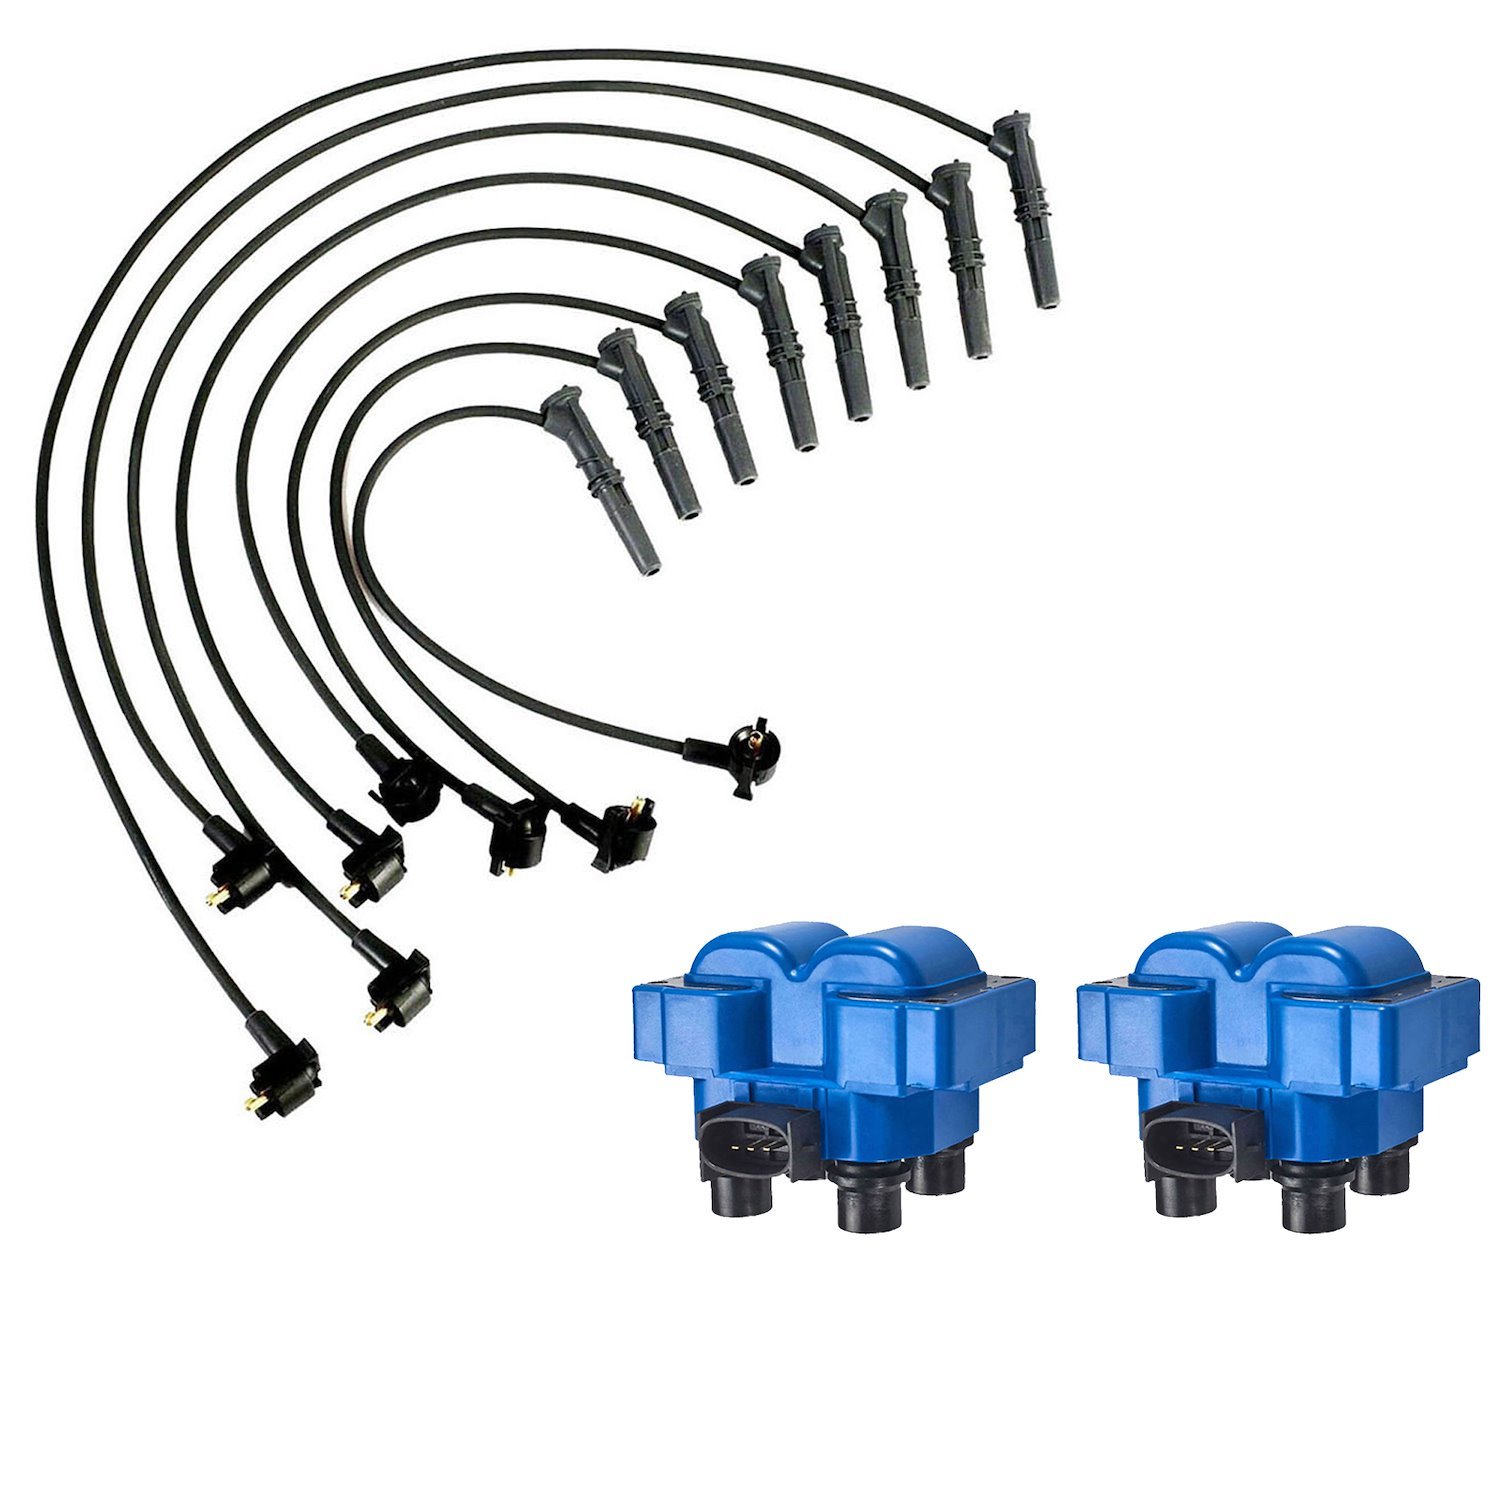 High-Performance Ignition Coil and Spark Plug Wire Kit